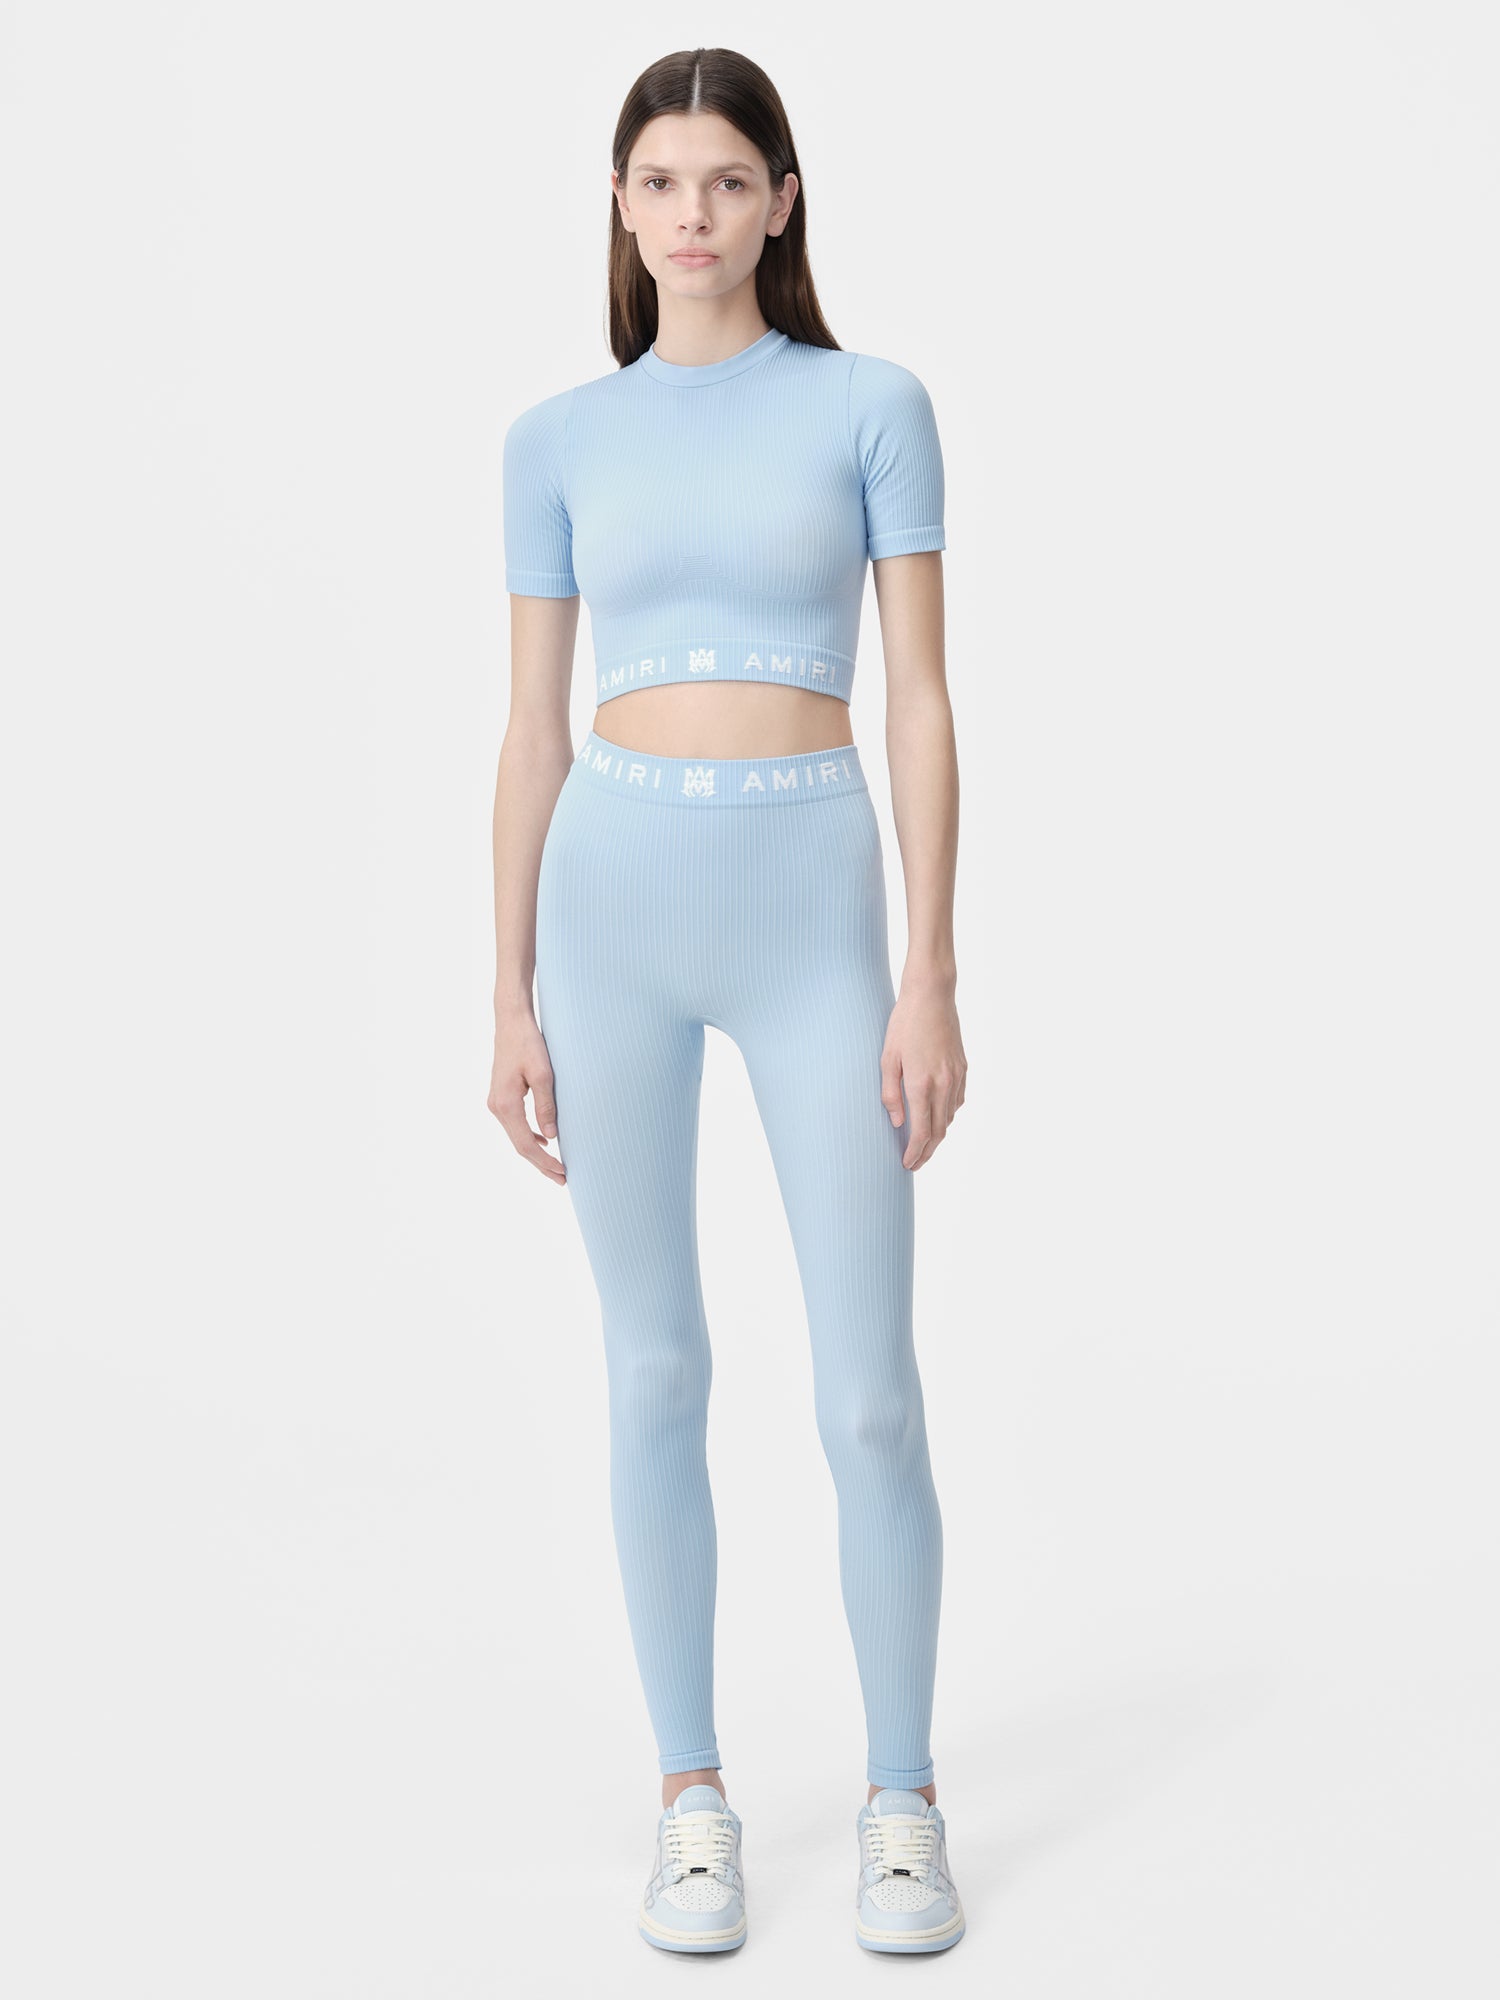 Product WOMEN - WOMEN'S MA RIBBED SEAMLESS LEGGING - Cerulean featured image